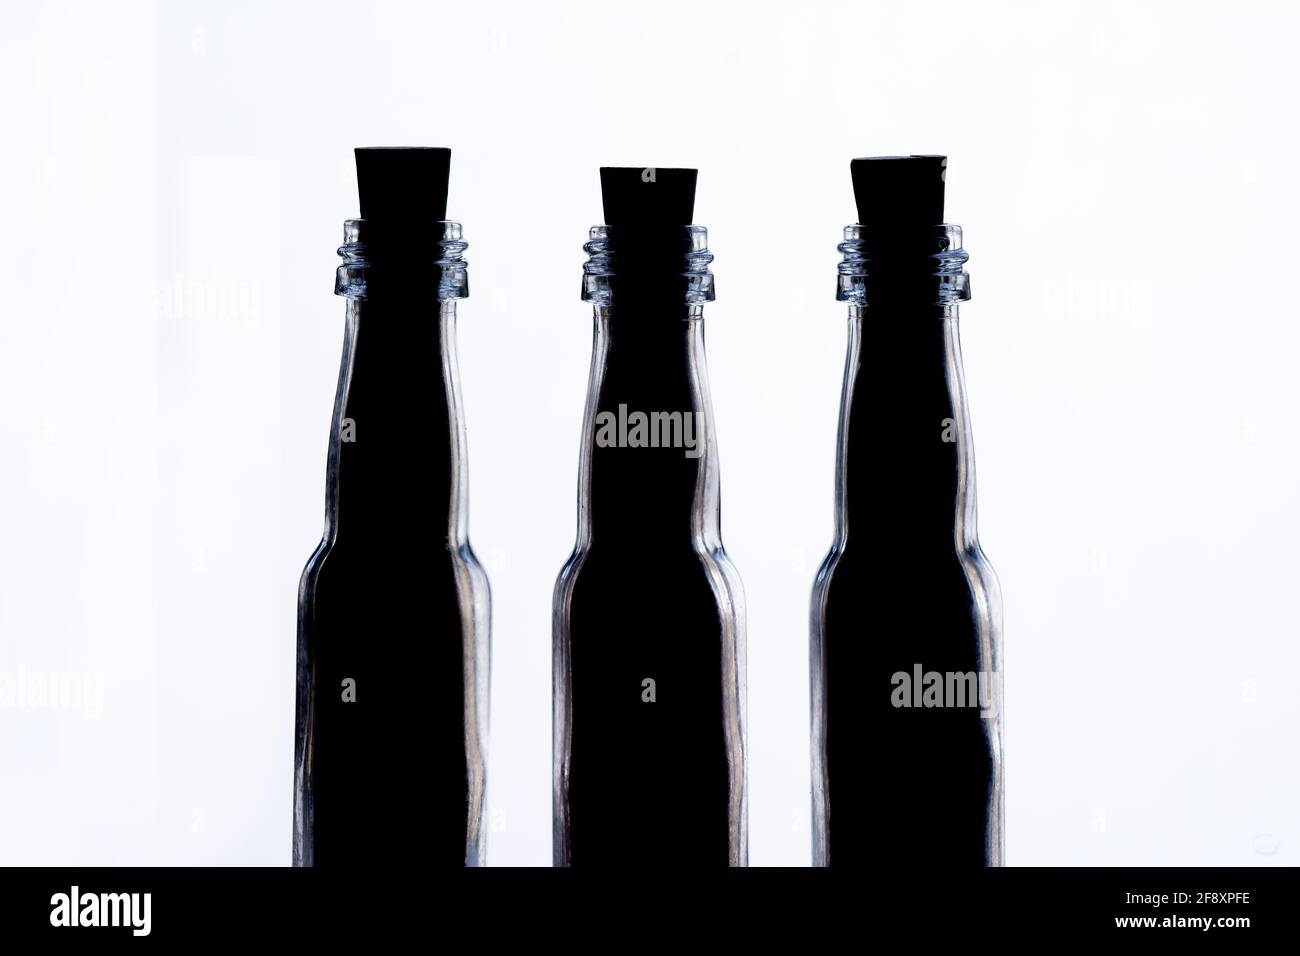 Three-quarters shot of three small backlit glass bottles in a row. Flacons are filled with content to the top and sealed with cork stoppers. Stock Photo